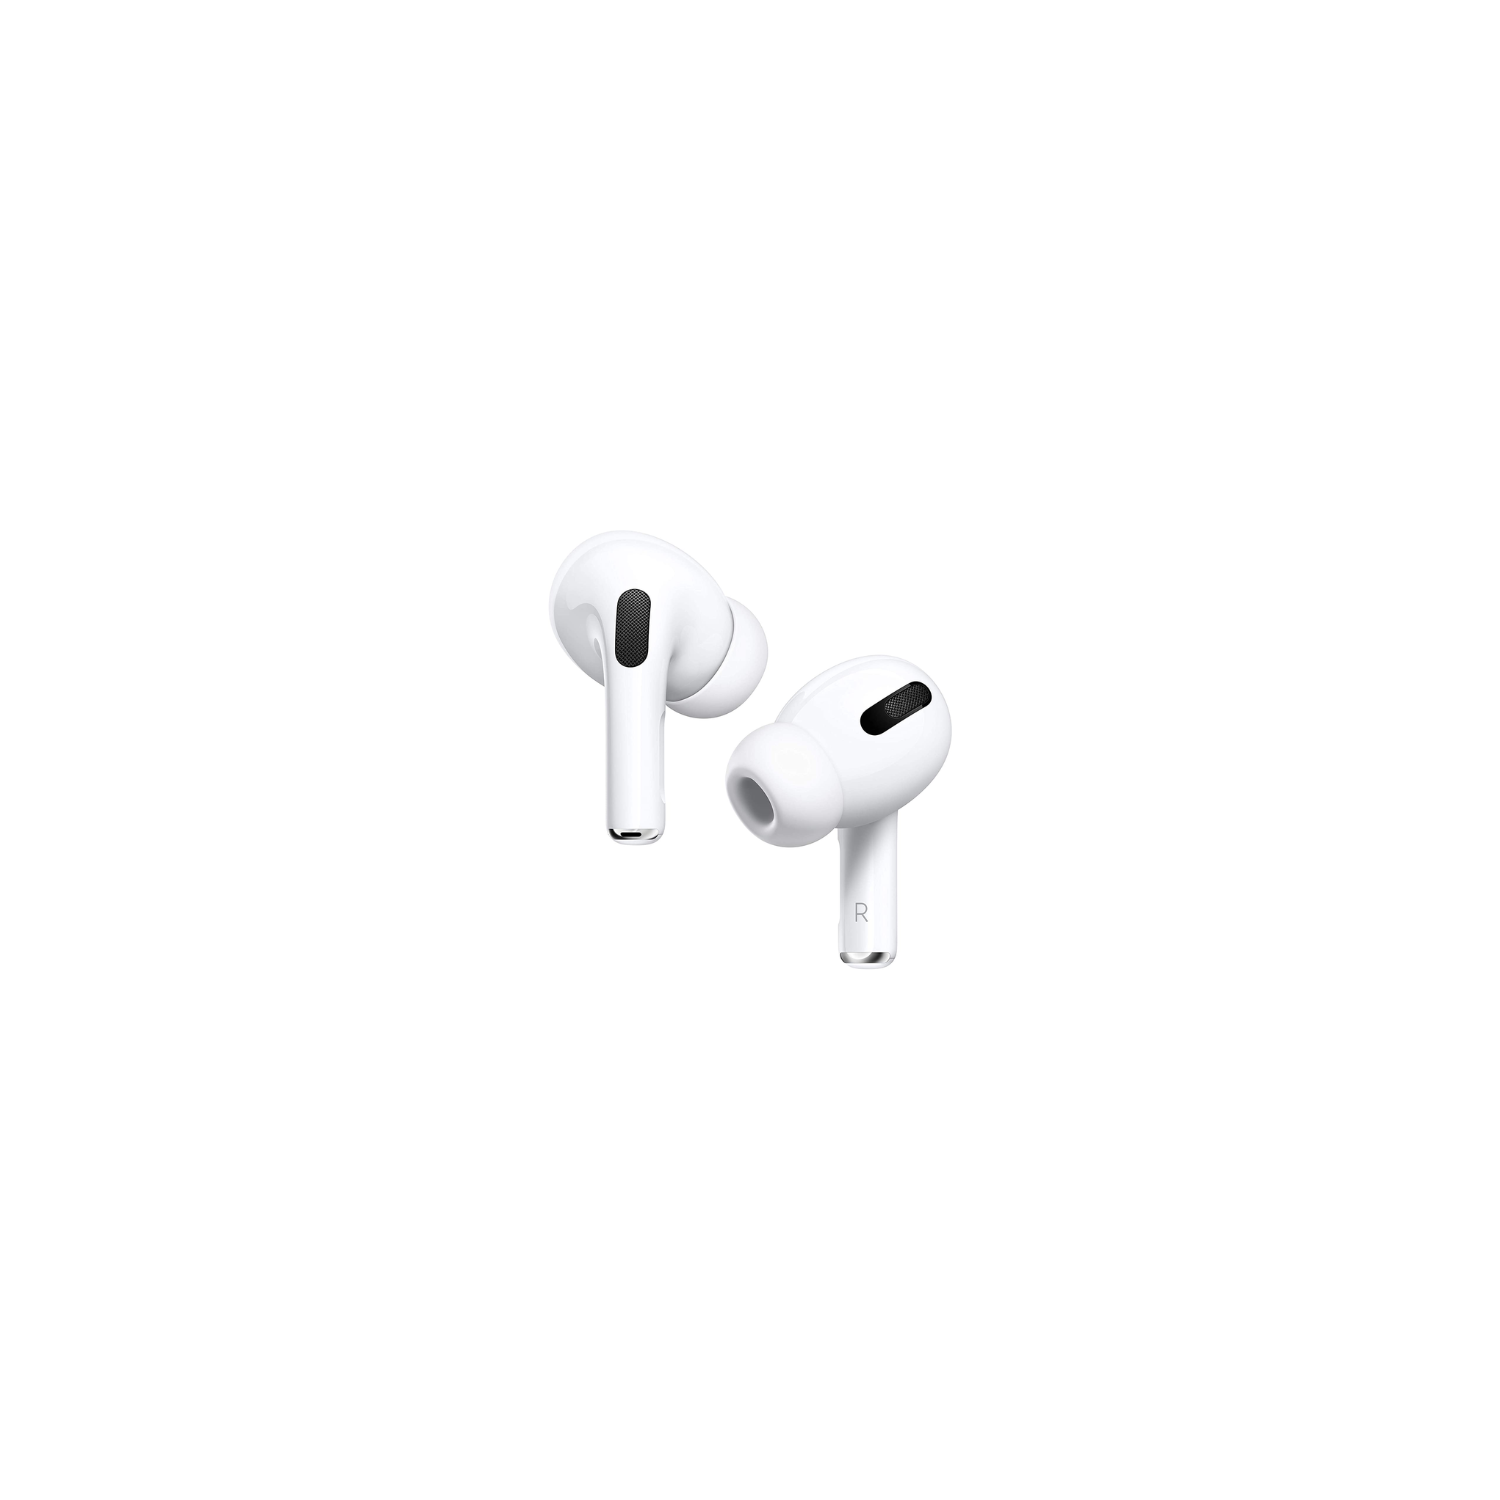 (Refurbished Good) - Apple AirPods Pro In-Ear Noise Cancelling Truly Wireless Headphones with MagSafe Charging Case